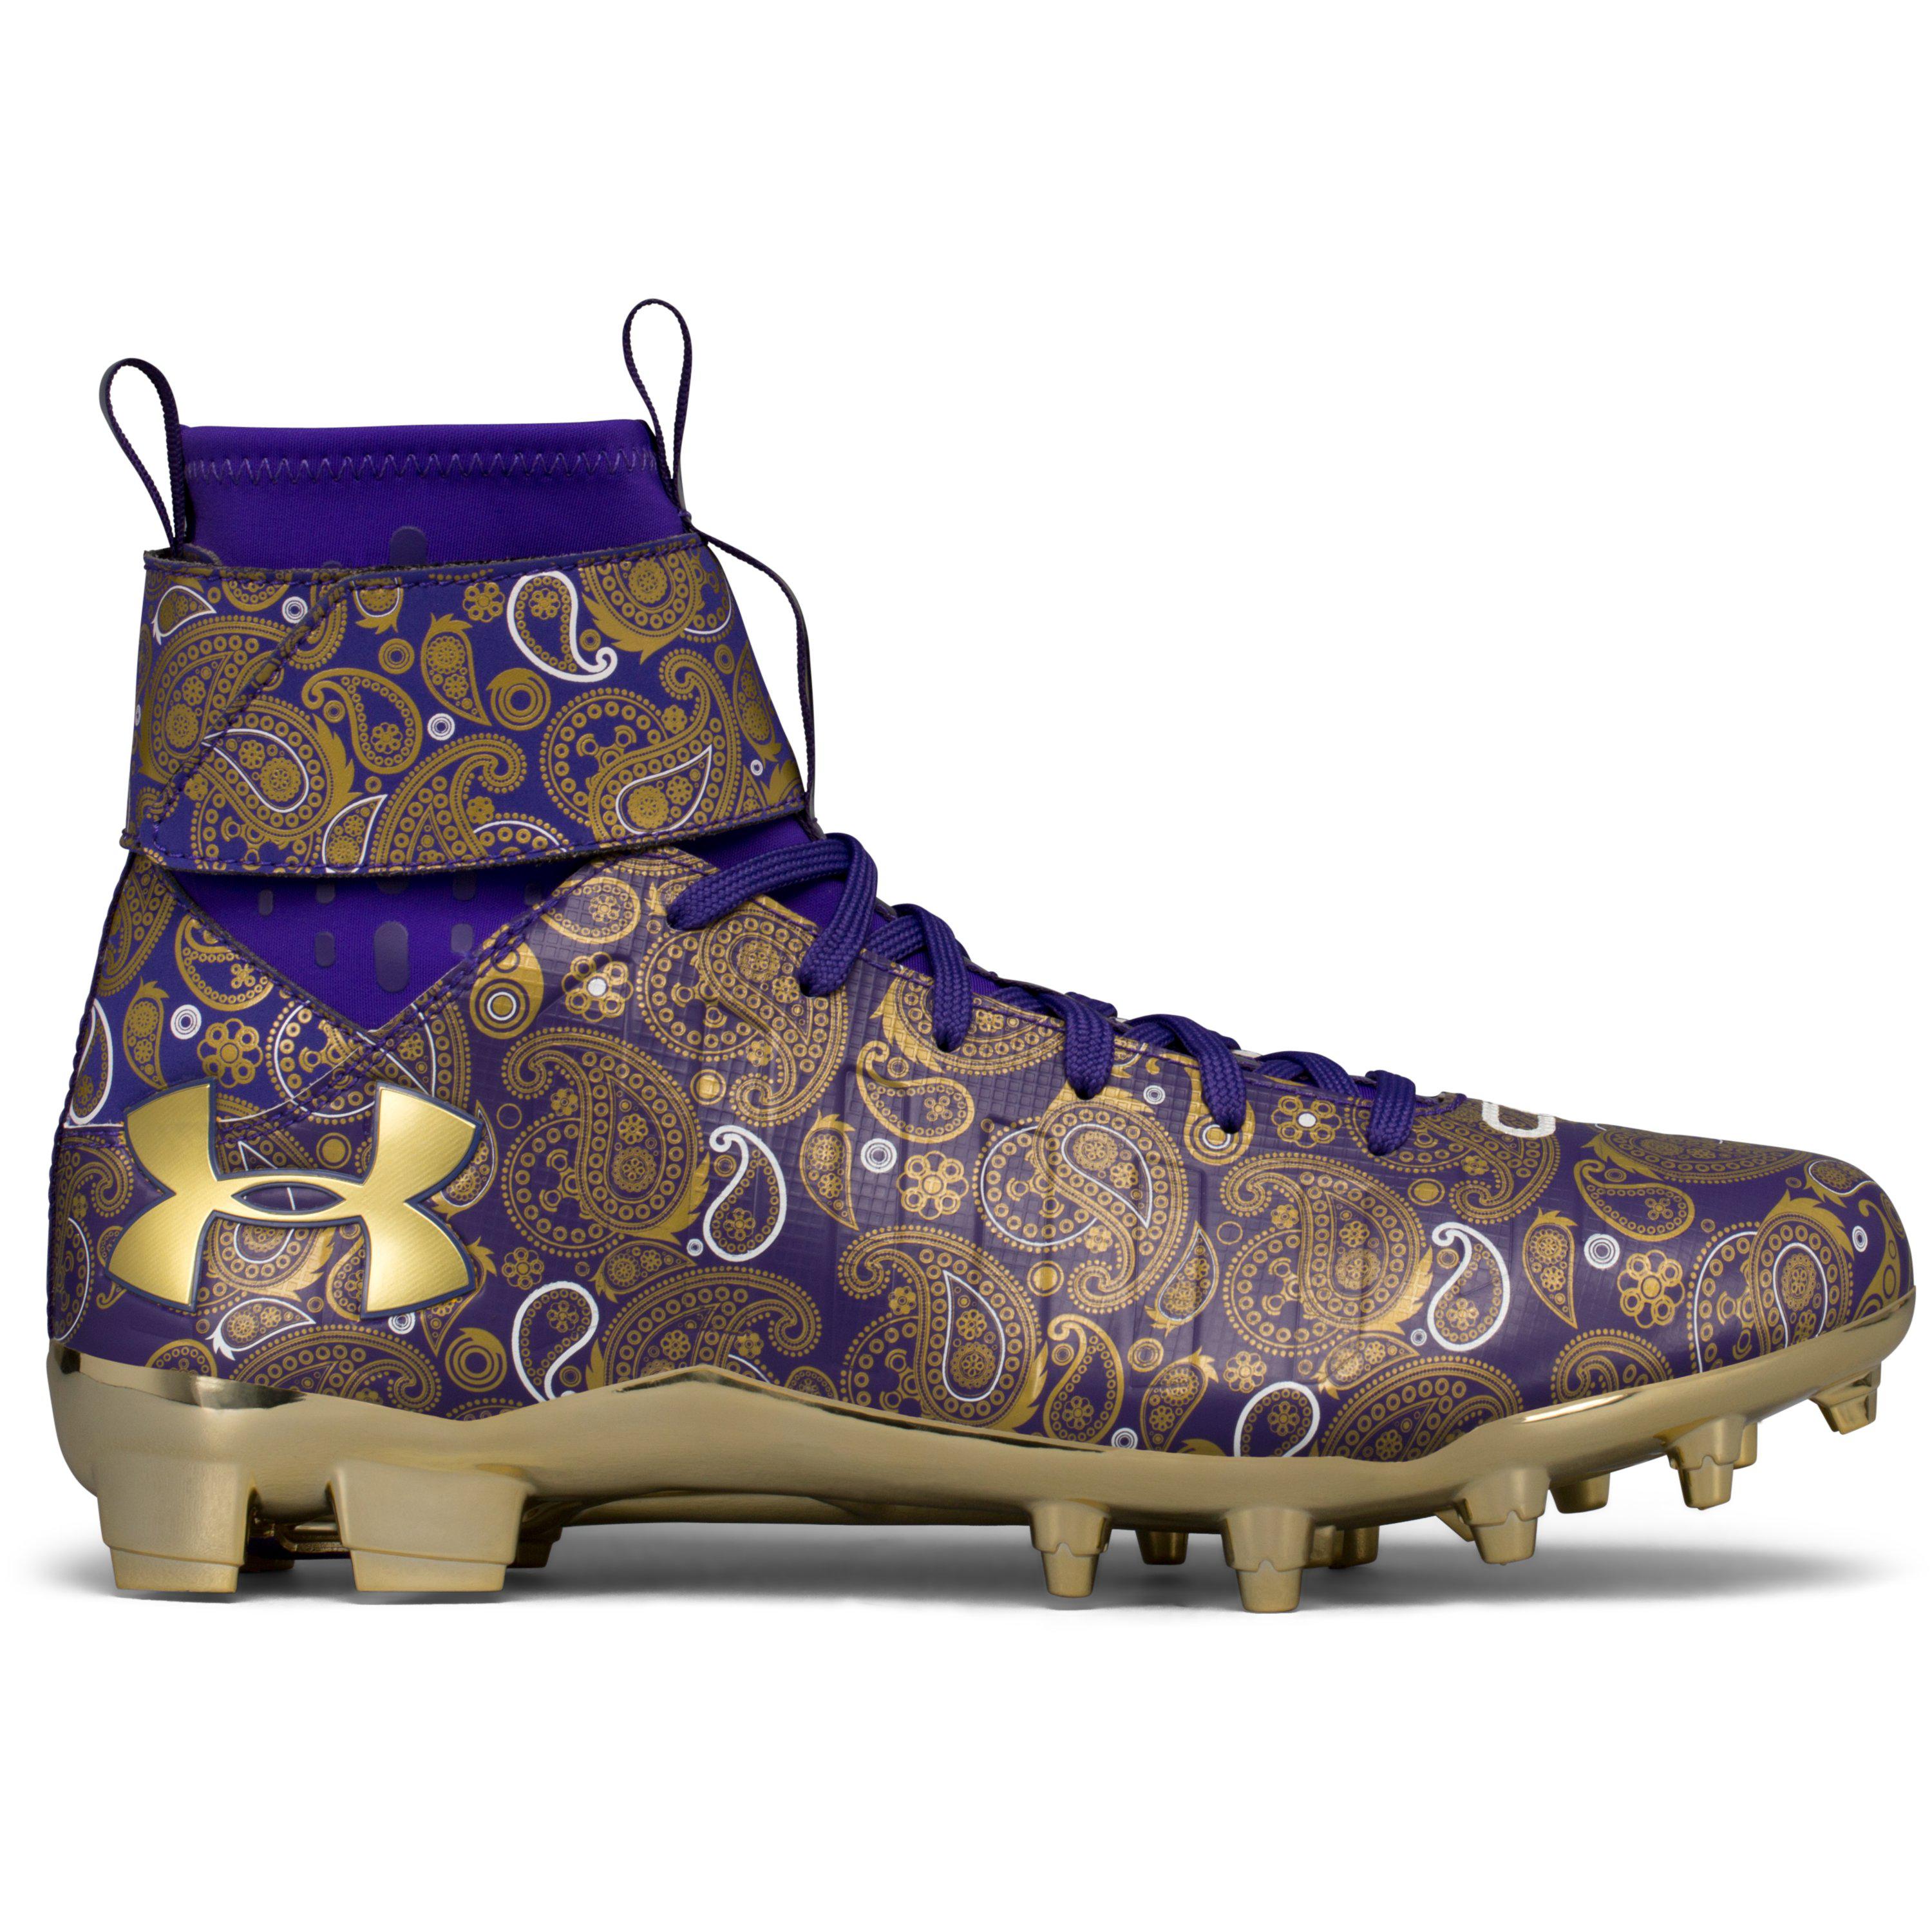 Under Armour C1N MC Mens Football Cleats 1289764 500 Purple/Gold Limited Edition 